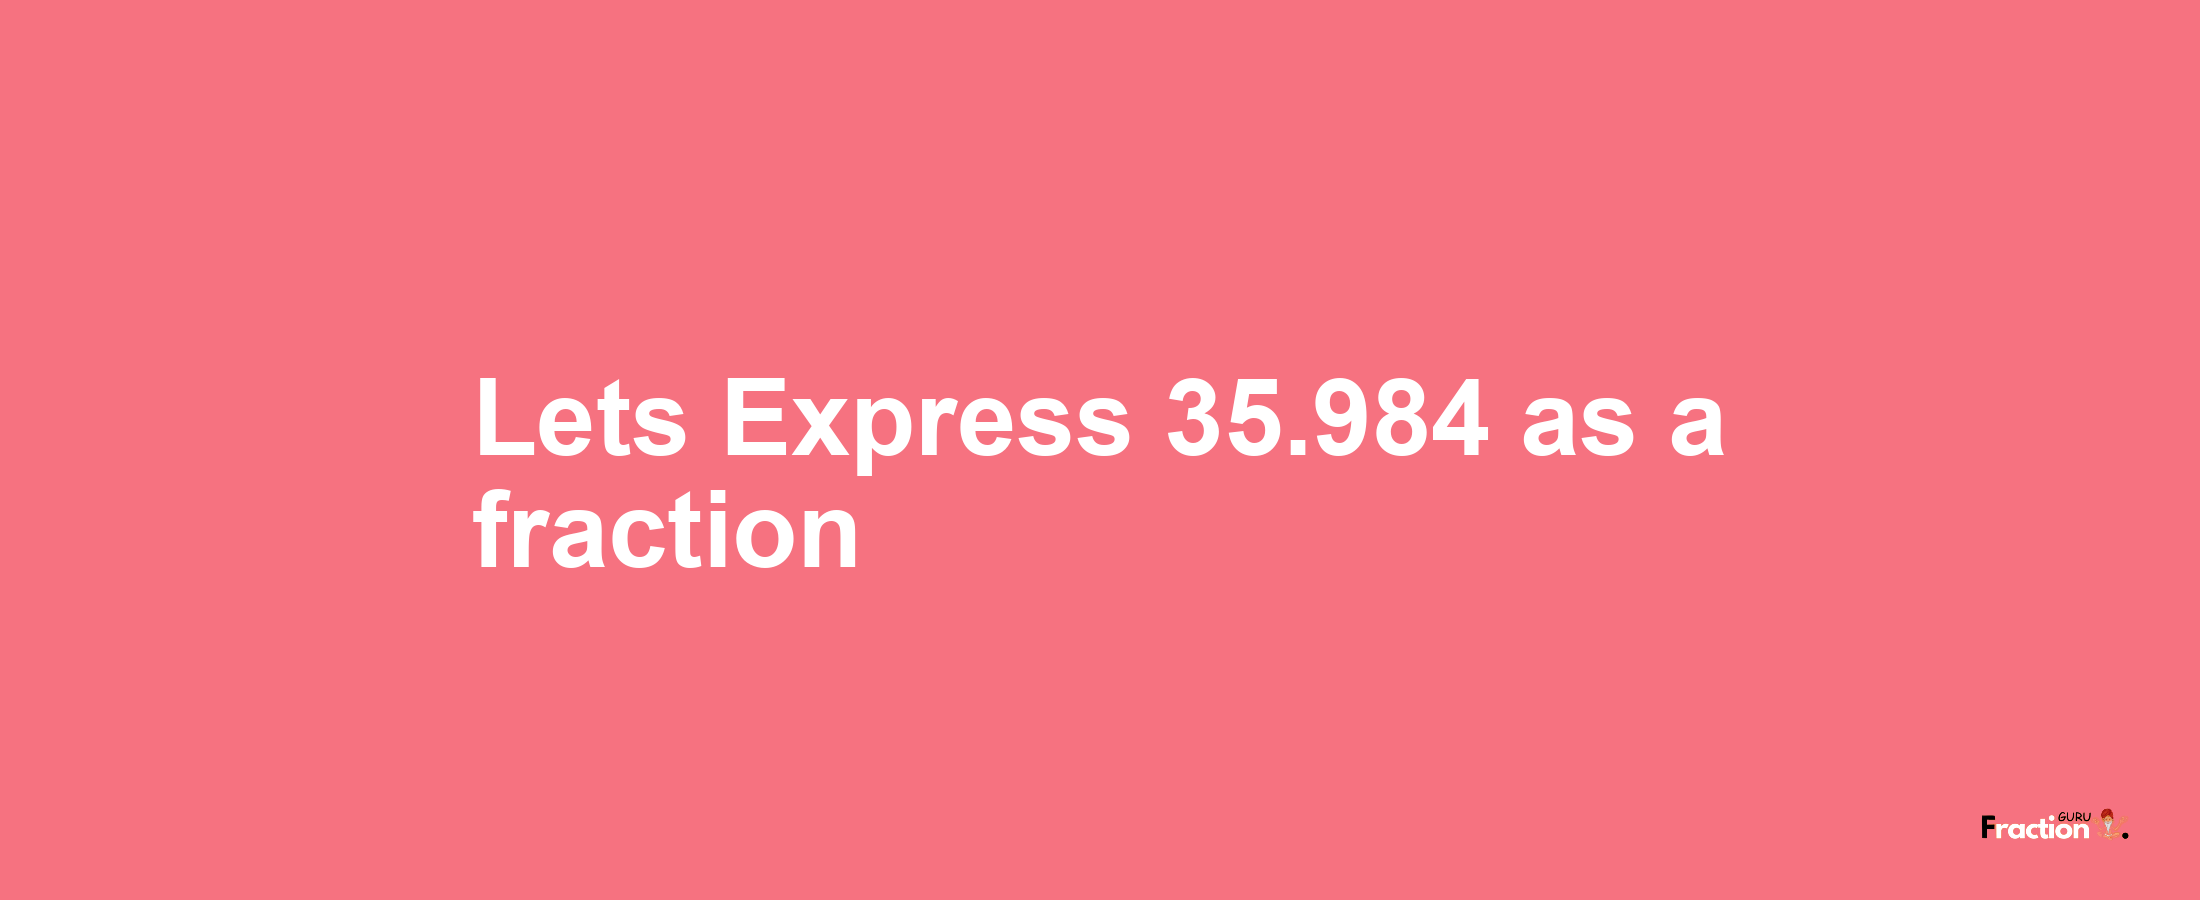 Lets Express 35.984 as afraction